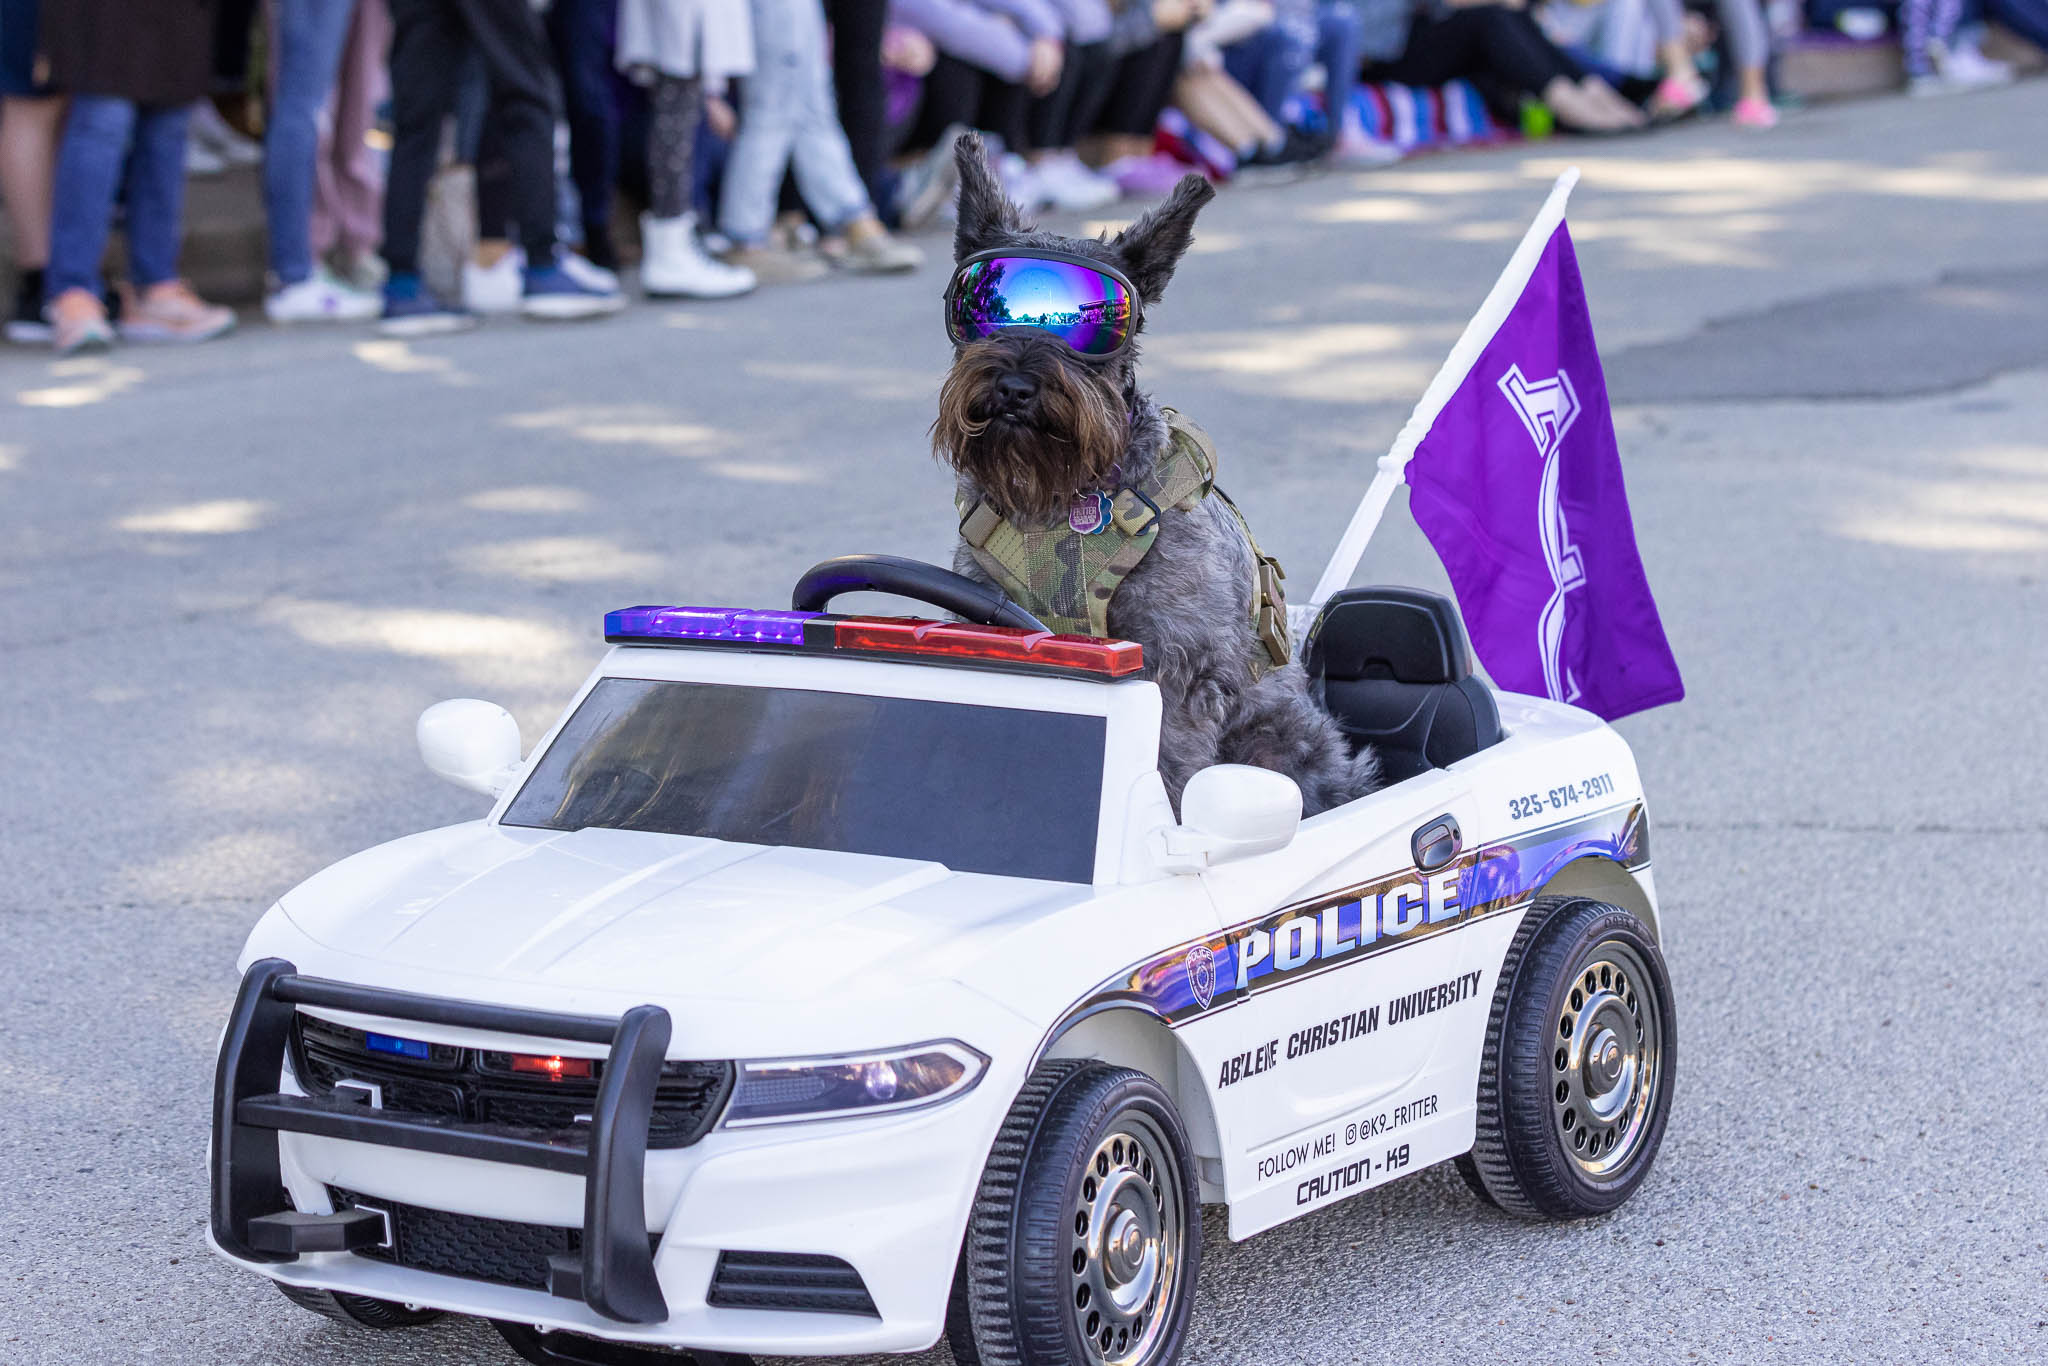 Fritter in her own police car during Homecoming